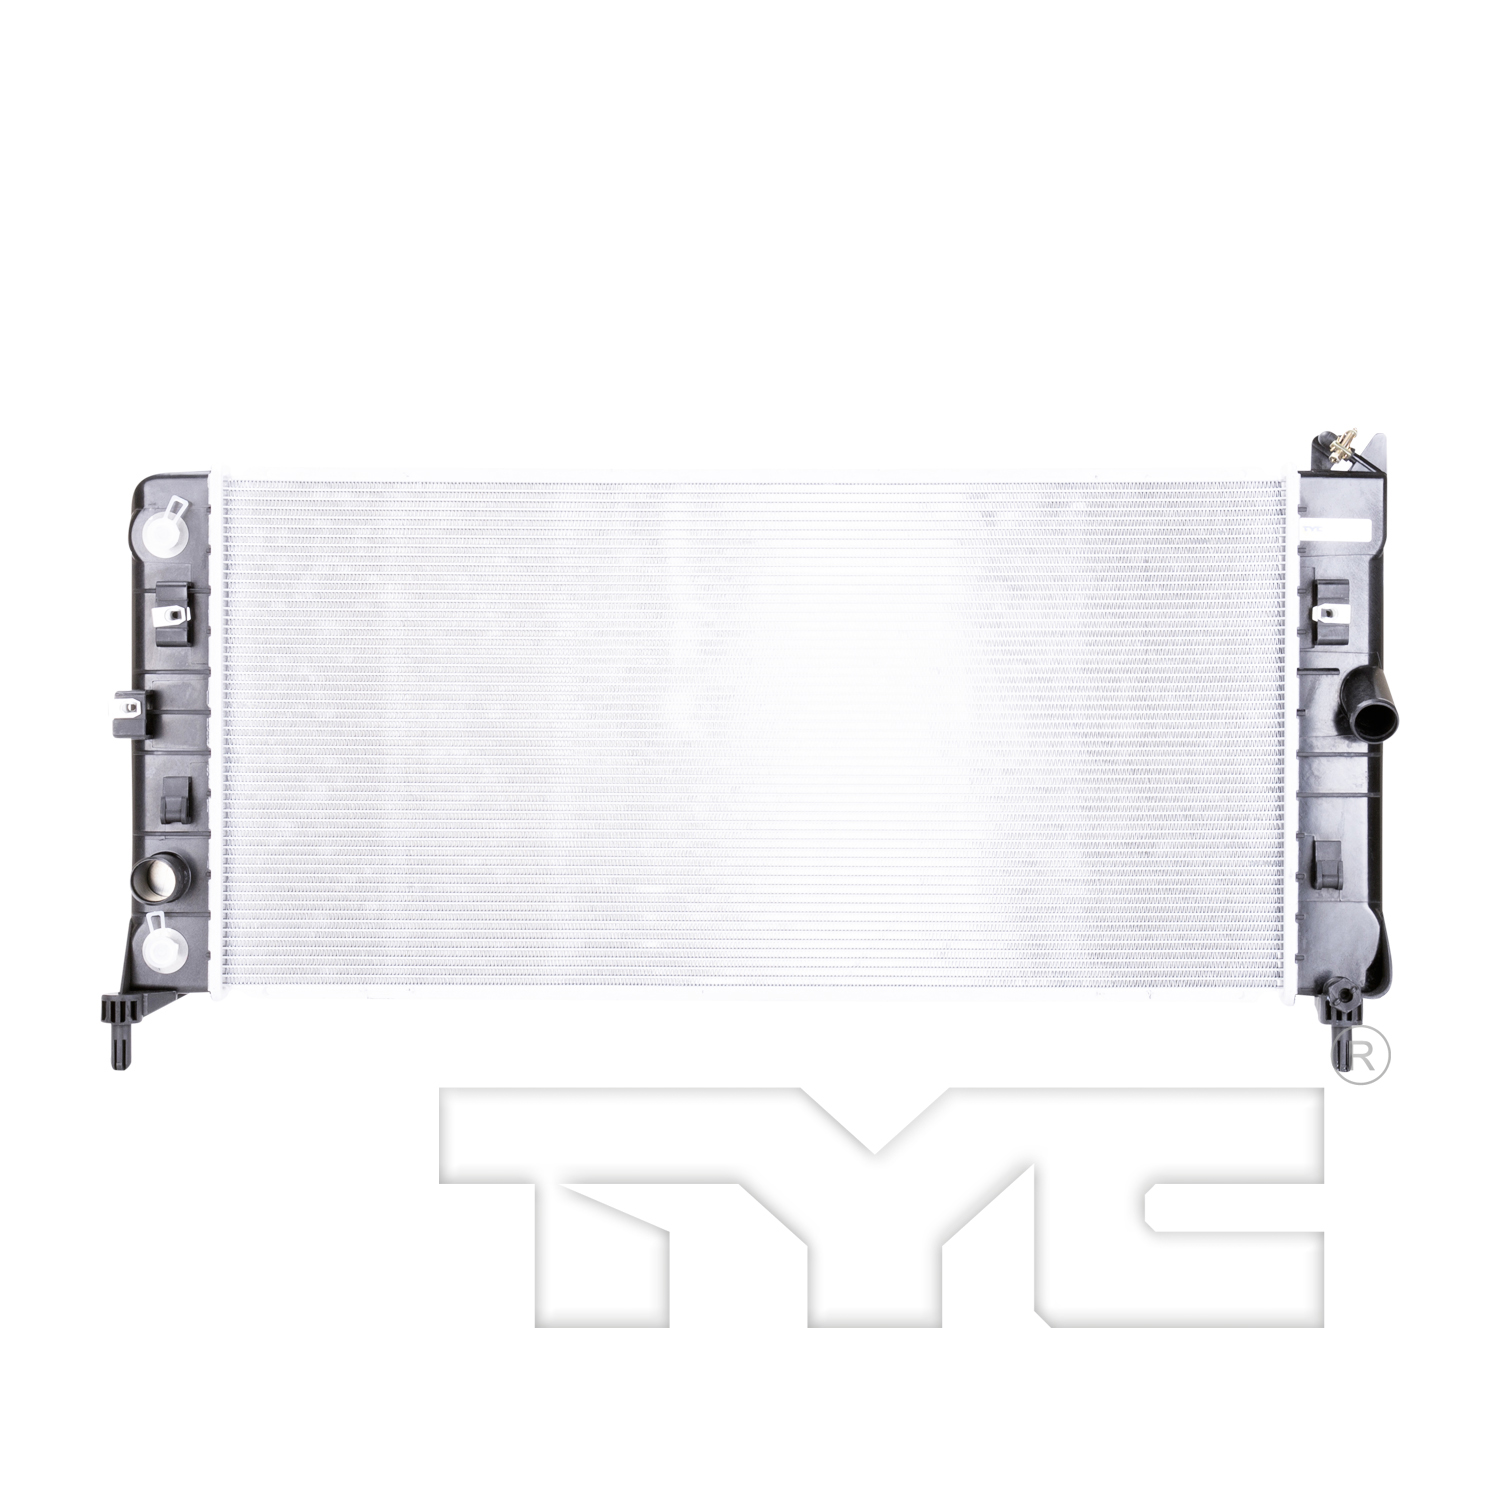 Aftermarket RADIATORS for CHEVROLET - MONTE CARLO, MONTE CARLO,06-07,Radiator assembly